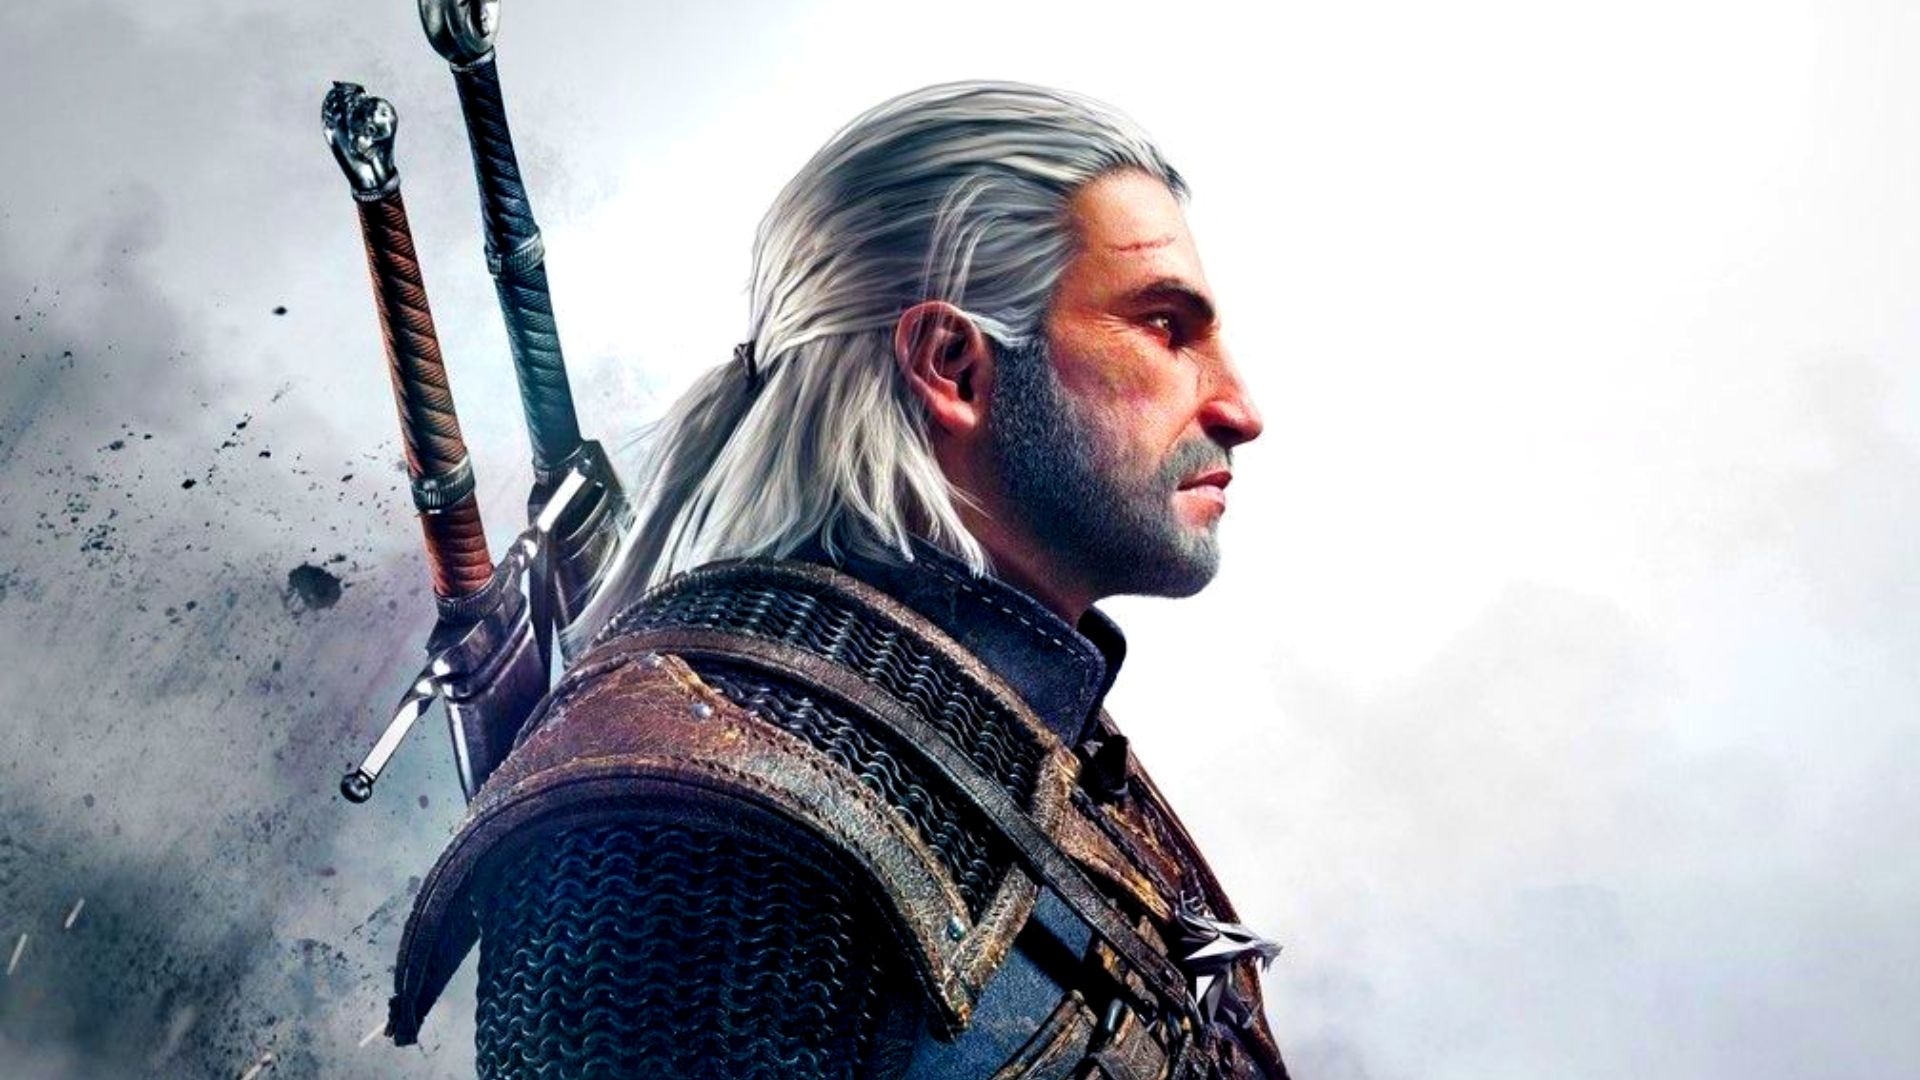 Geralt of Rivia is seemingly going to continue his exploits in The Witcher 4